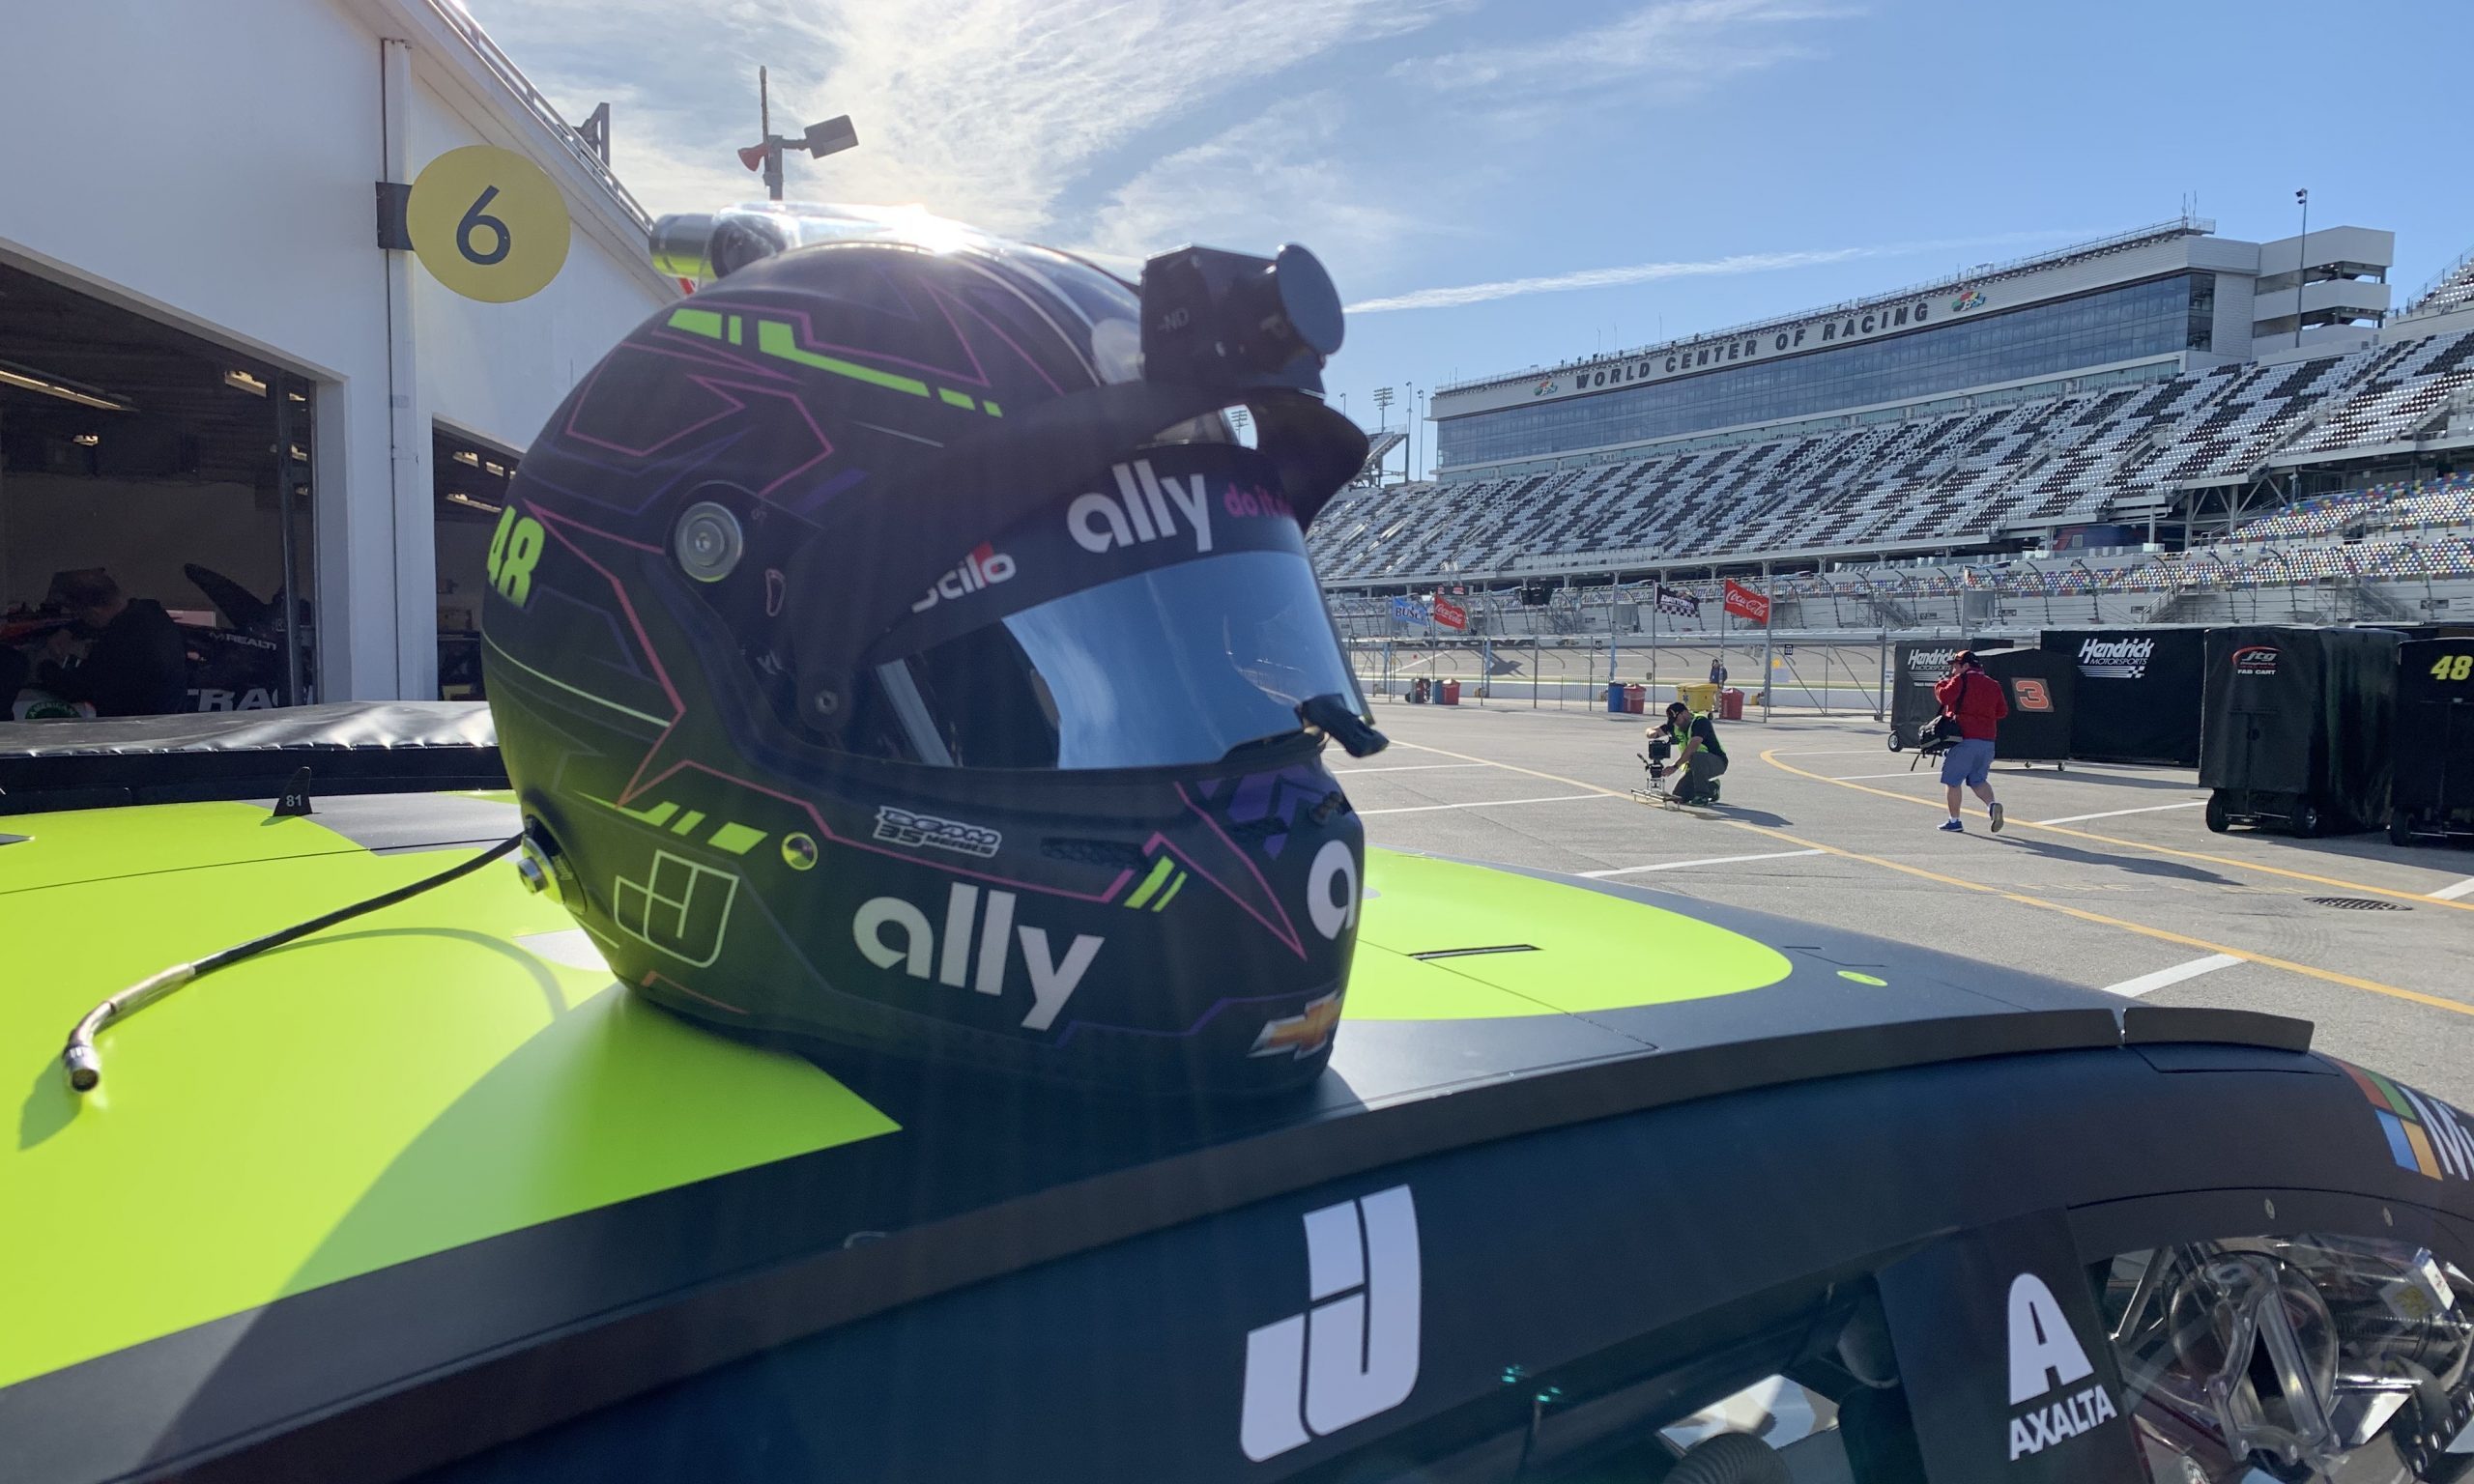 Live From Daytona 500 BSI Prioritizes Consistent Testing, Driver Safety With Visor Cam